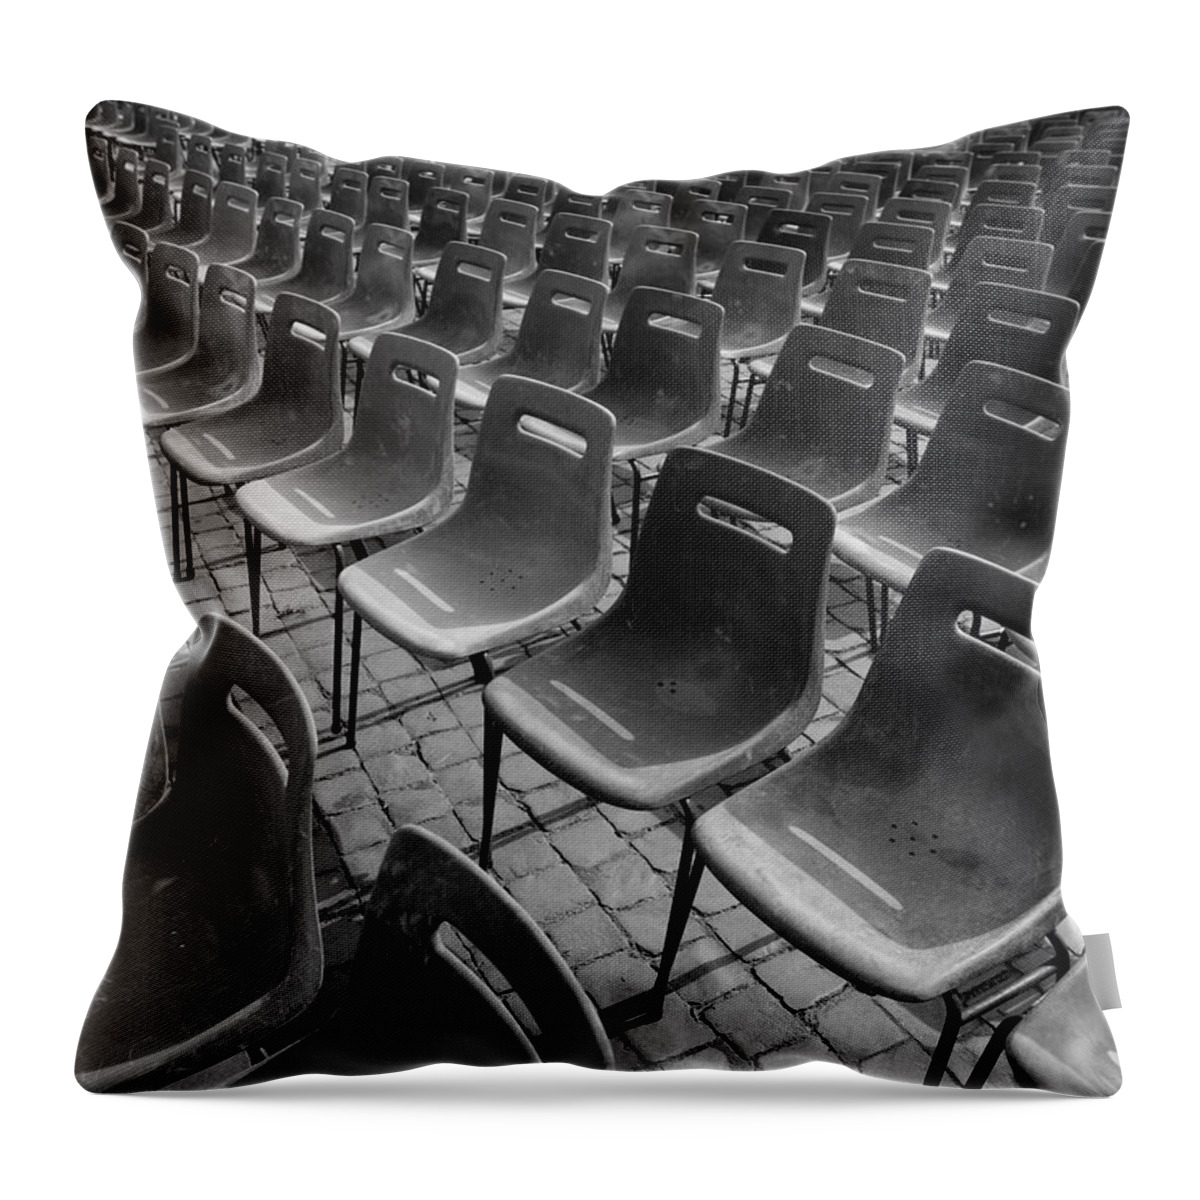 Chair Throw Pillow featuring the photograph Chairs by Keith Levit